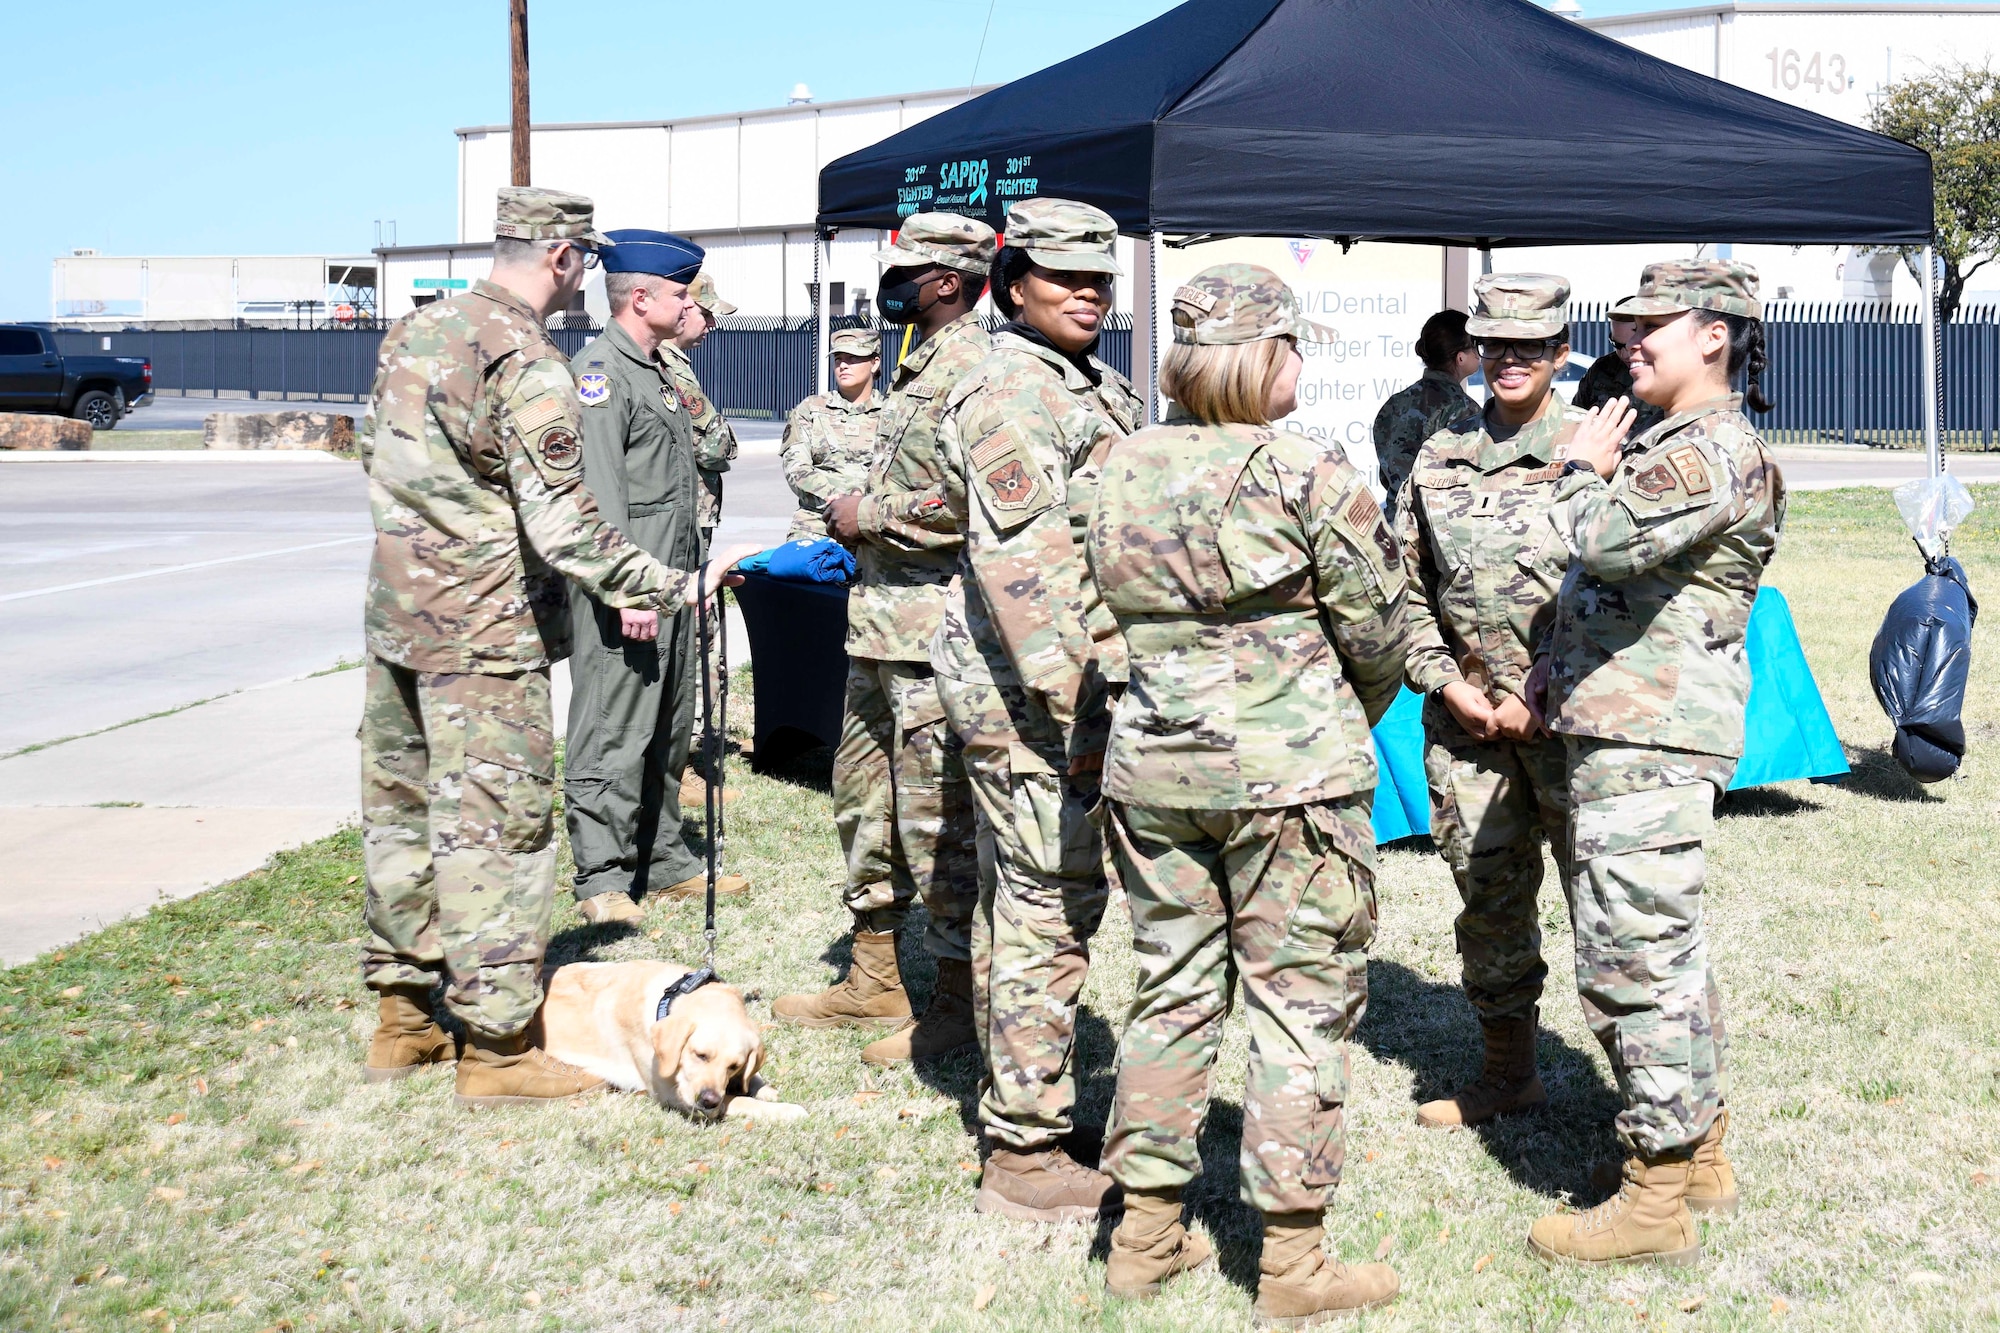 301 st Fighter Wing Airman talk during the Sexual Assault Prevention and

Response meet and greet at Naval Air Station Joint Reserve Base Fort Worth, Texas, April 2, 2022. The SAPR team provided free coffee, donuts, and informational merchandise to spread awareness on sexual assault.